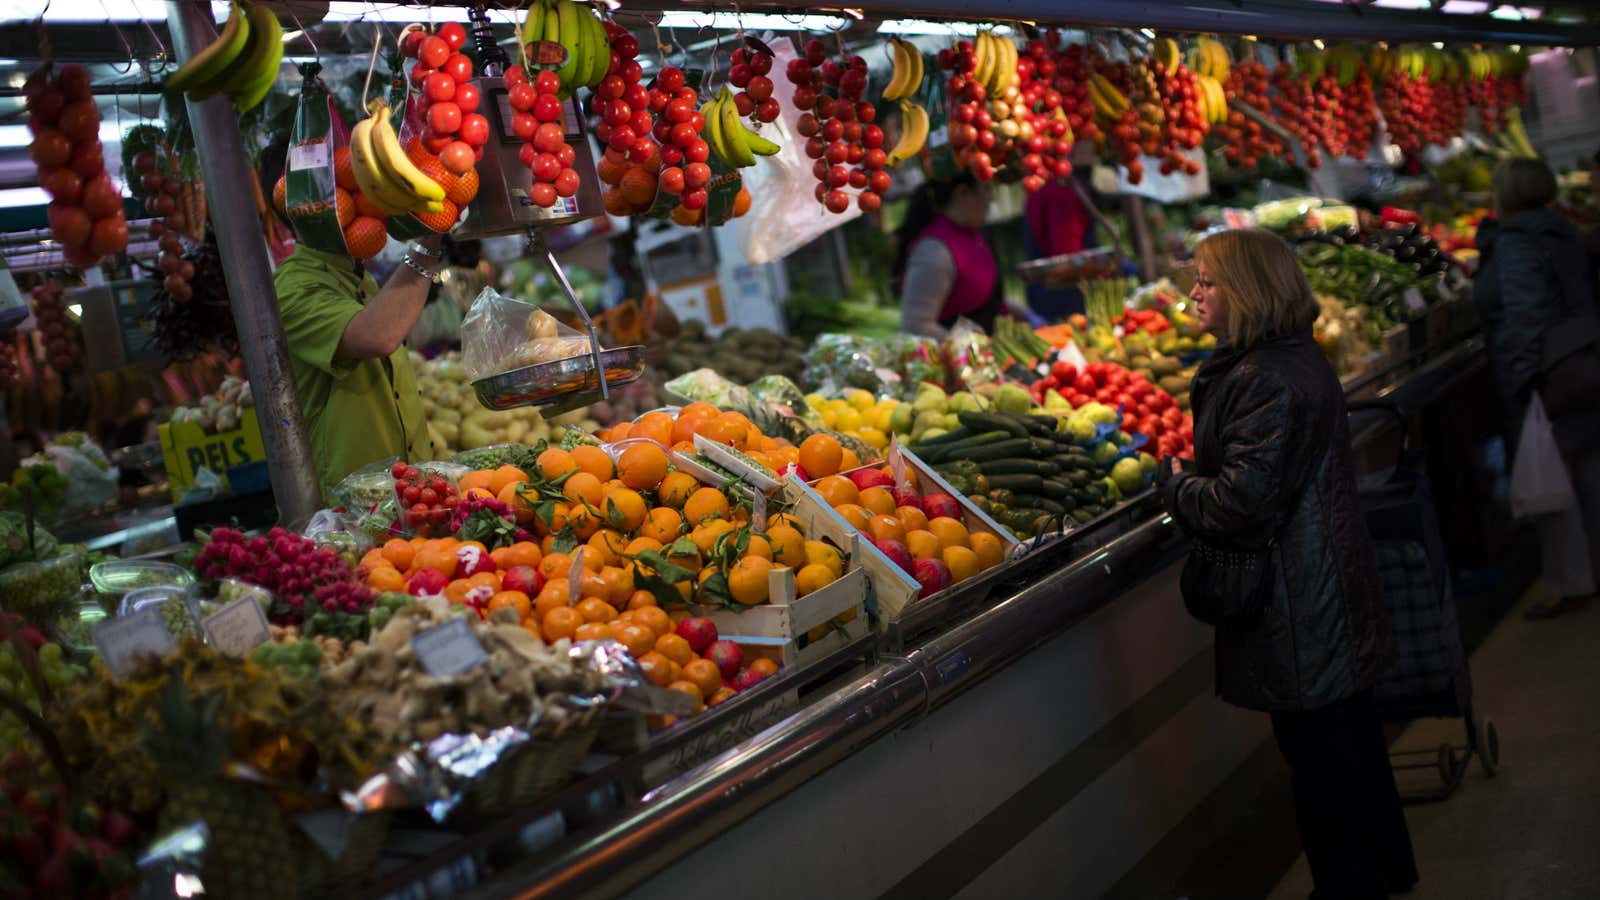 In this Thursday Jan. 17, 2013 file photo, a woman buys fruit at a market in Barcelona, Spain.